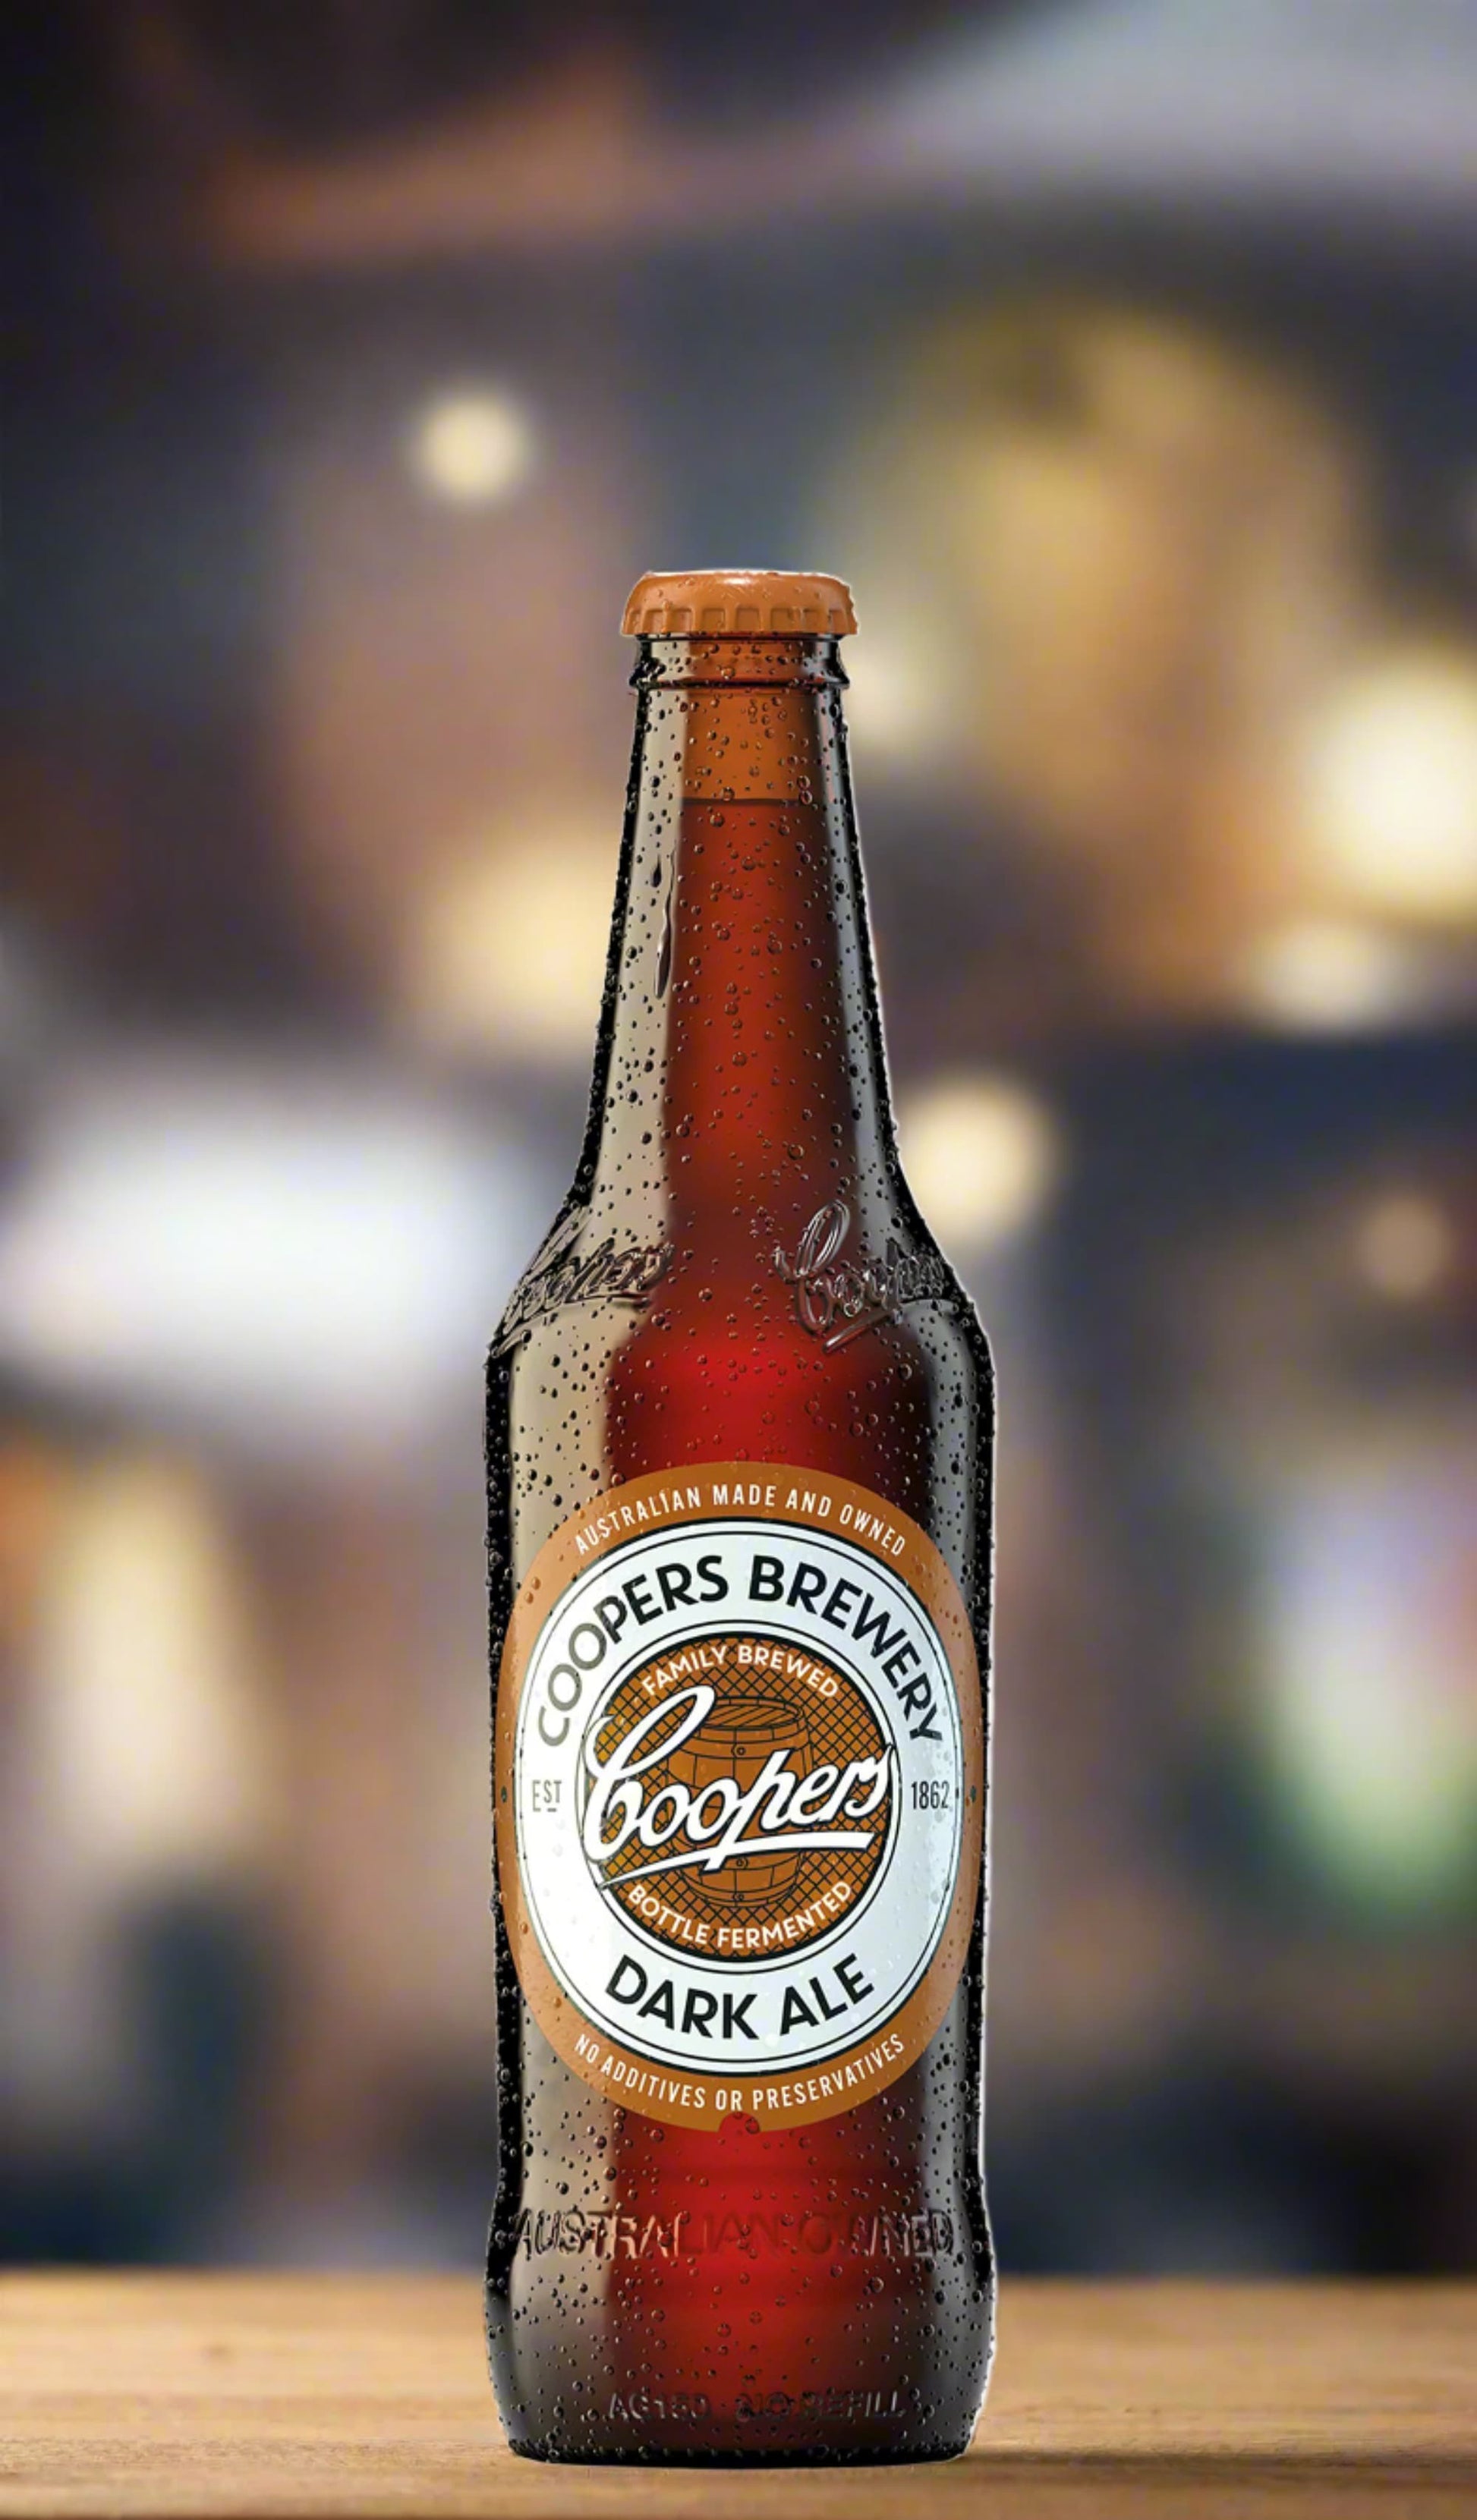 Find our more, explore the range and buy Coopers Dark Ale available at Wine Sellers Direct - Australia's independent liquor specialists.